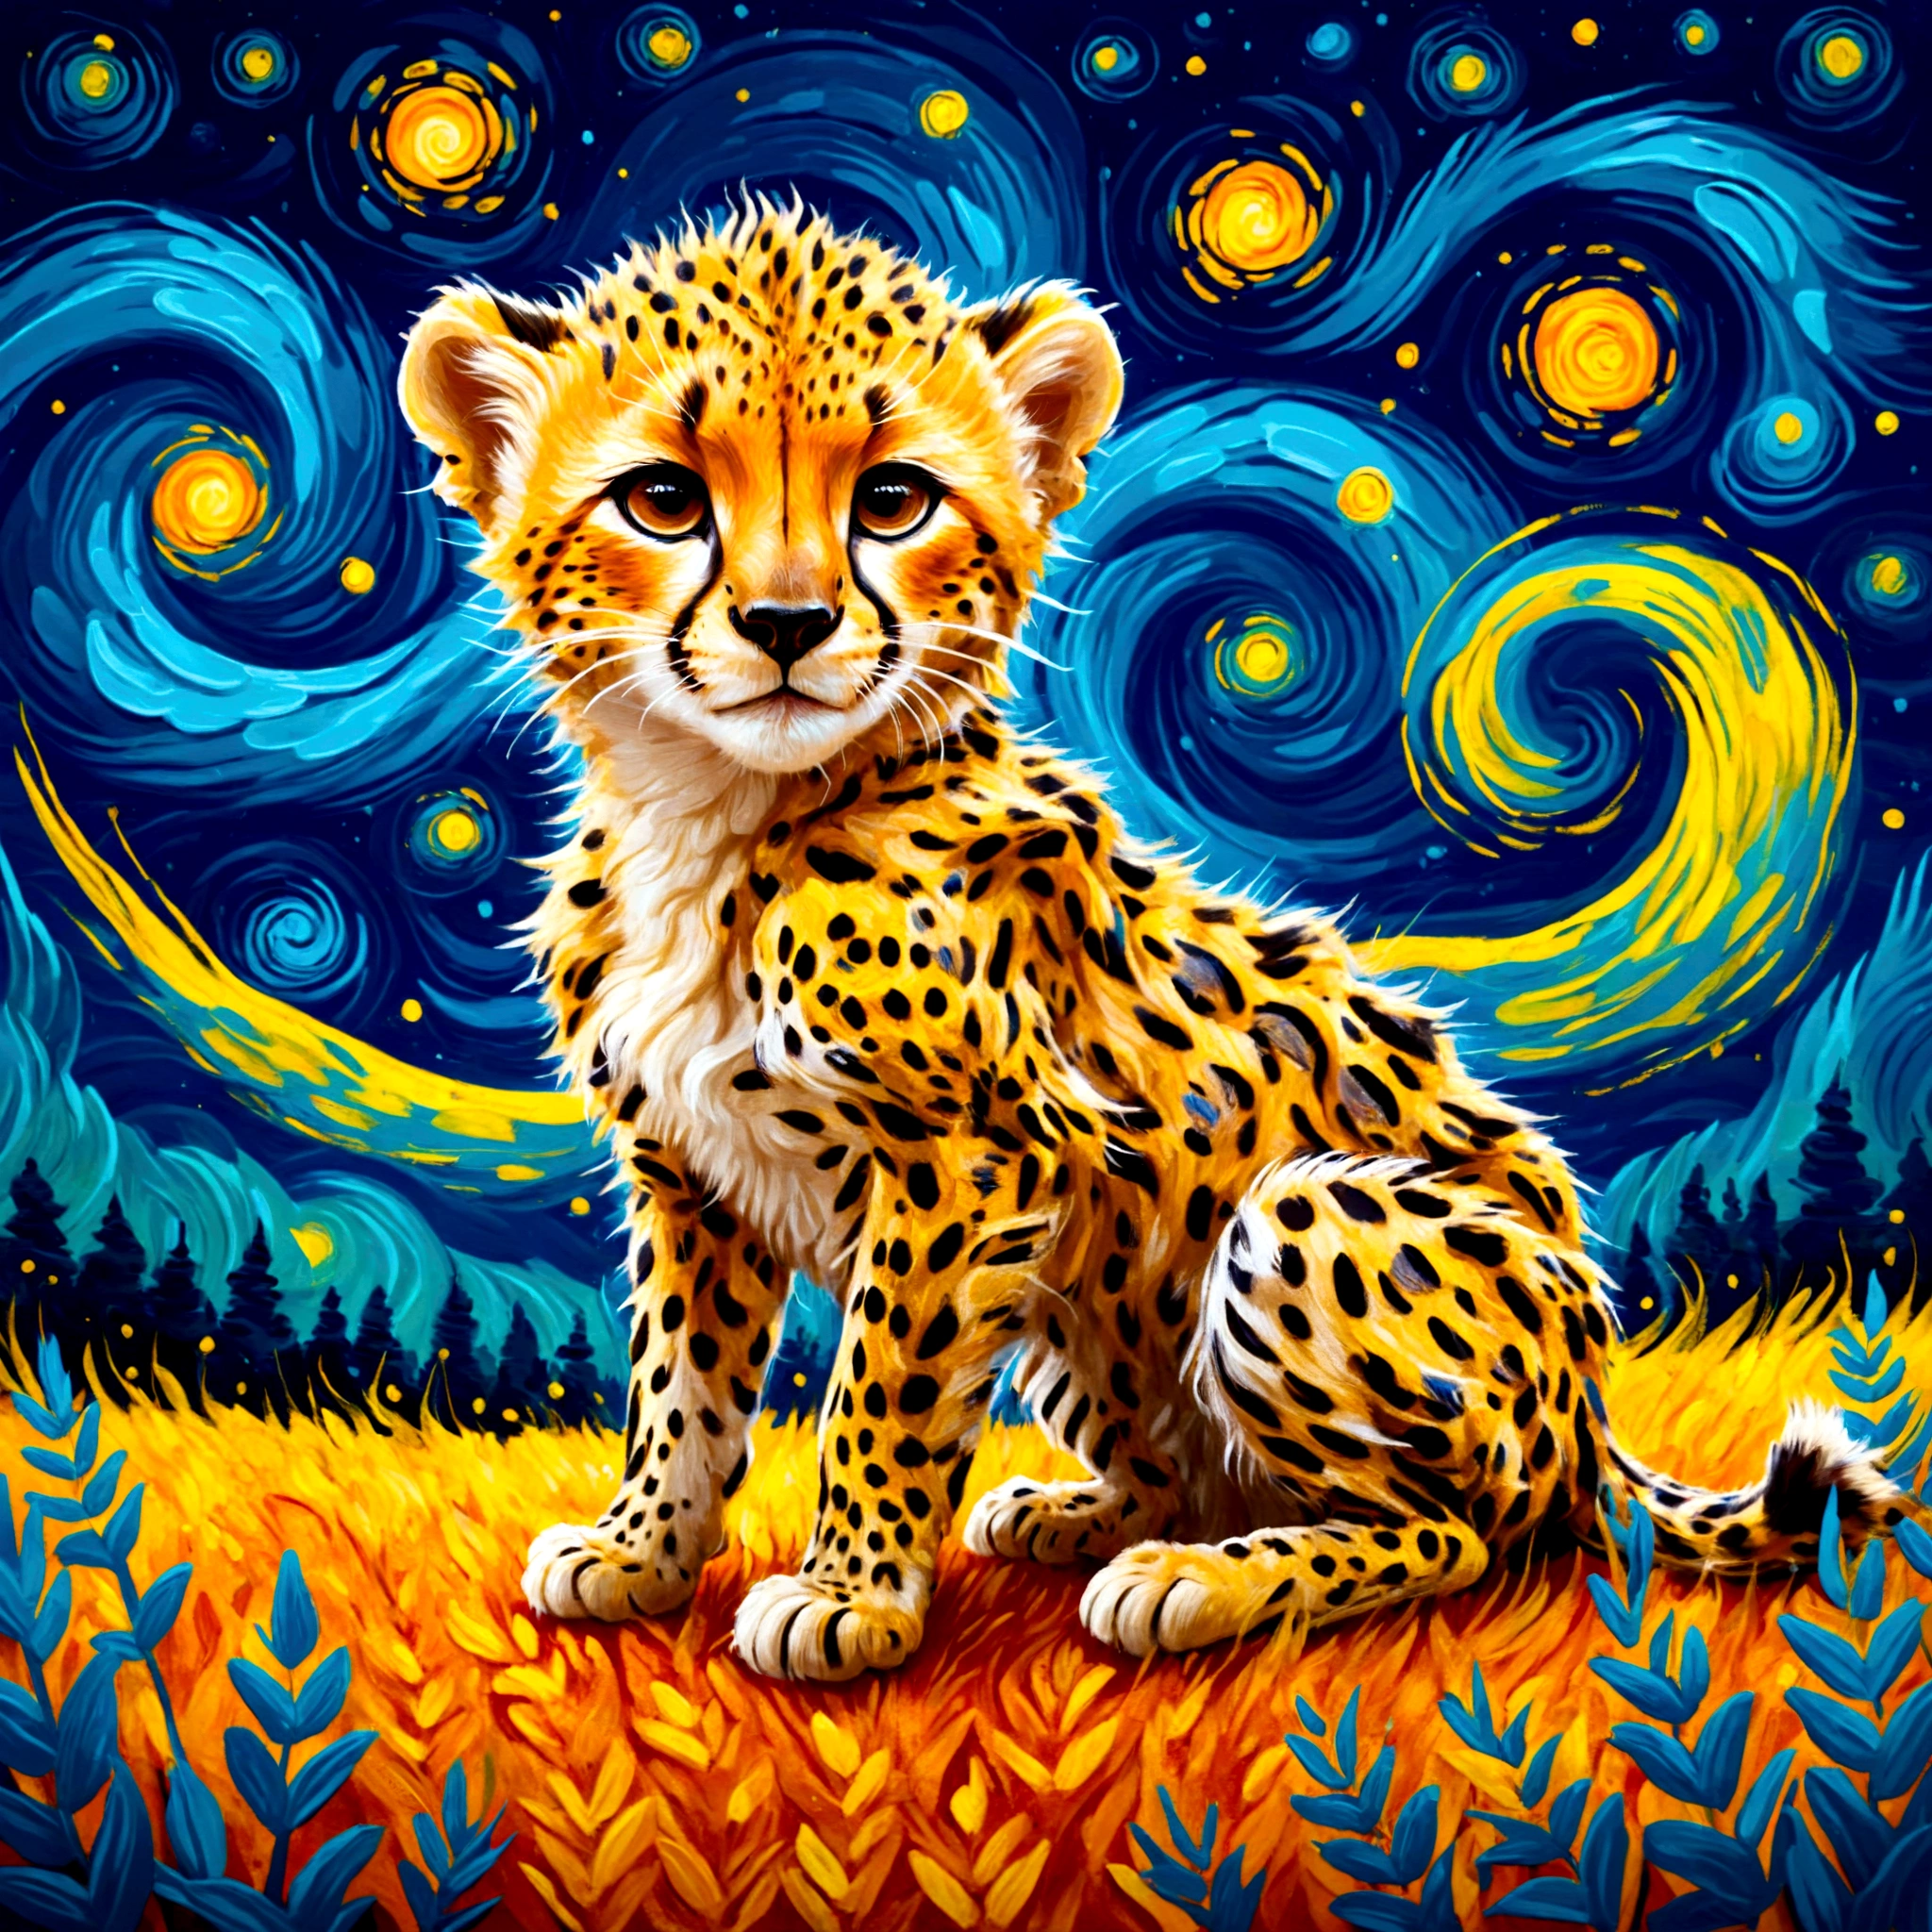 A stylized illustration of a cheetah cub in the style of Van Gogh, with swirling brushstrokes and vibrant colors, 
Vivid contrast, gentle touch rendering, accurate detail, high detail, shining contours, precision, high-quality, stunningly beautiful touch rendering, fantasy,